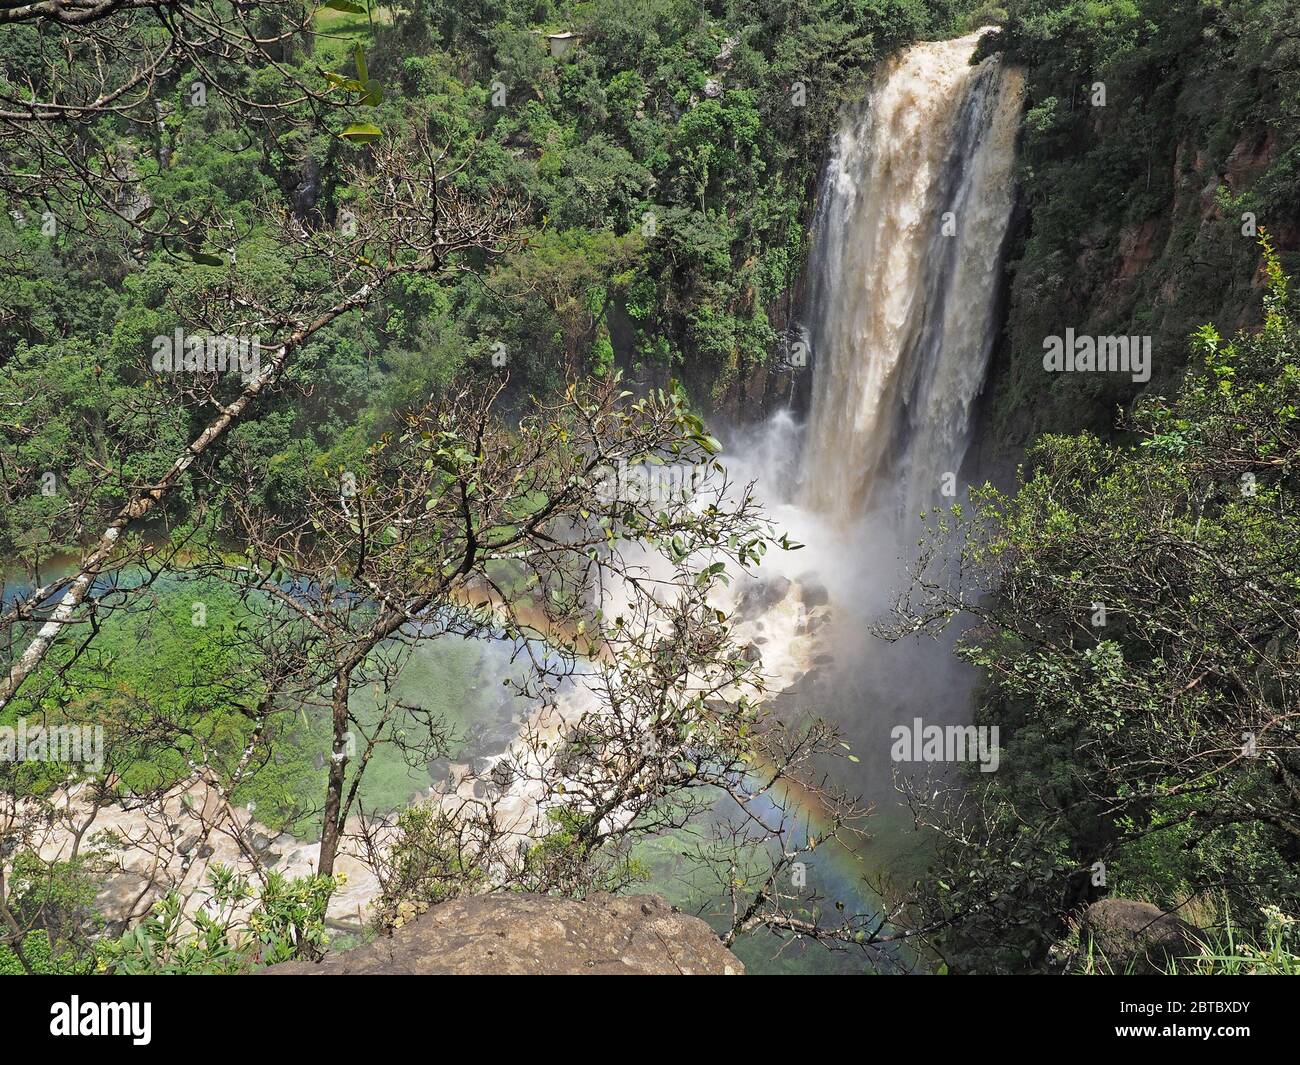 rainbow in the mist of thundering water vapour at Thomson's Falls where the Ewaso Ng'iro river tumbles 74m at Nyahururu, central Kenya, Africa Stock Photo